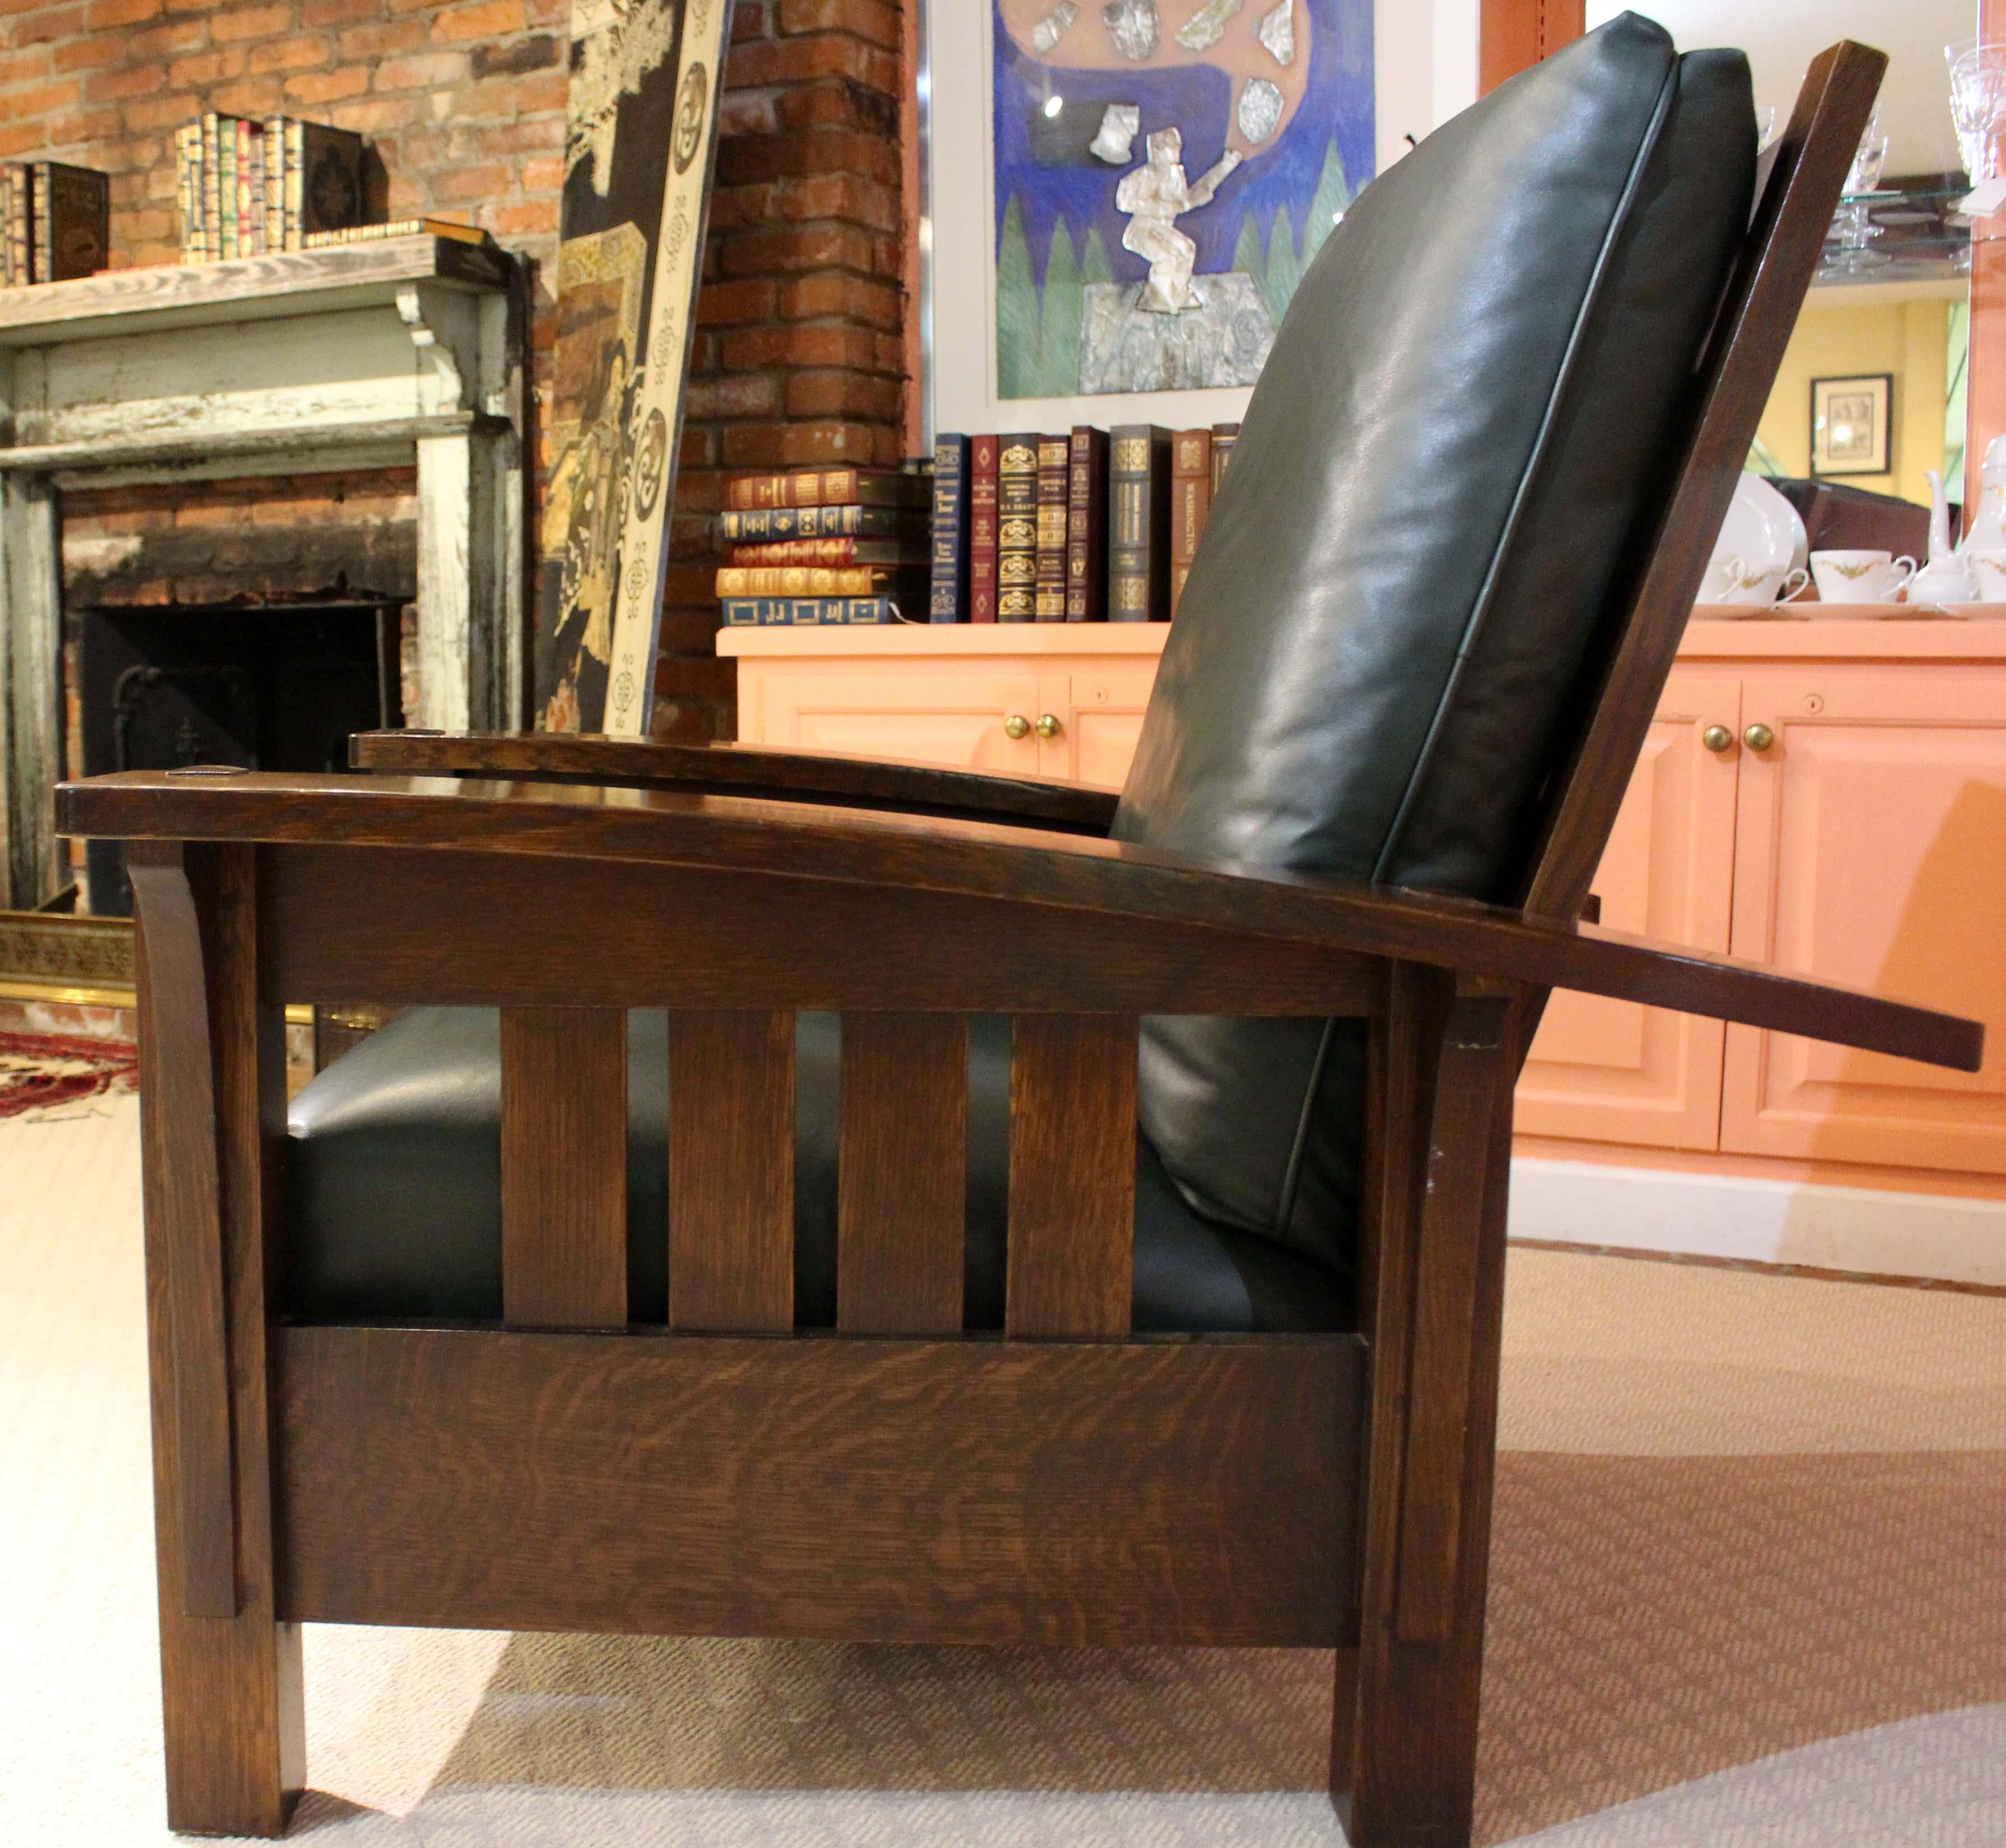 Vintage Stickley oak & blue-green leather Morris chair. The heavy oak pegs adjust to recline the chair to 4 positions. Superb craftsmanship. Bowed arms, wide enough to support a glass comfortably. Great figure in the solid oak. Stickley label,